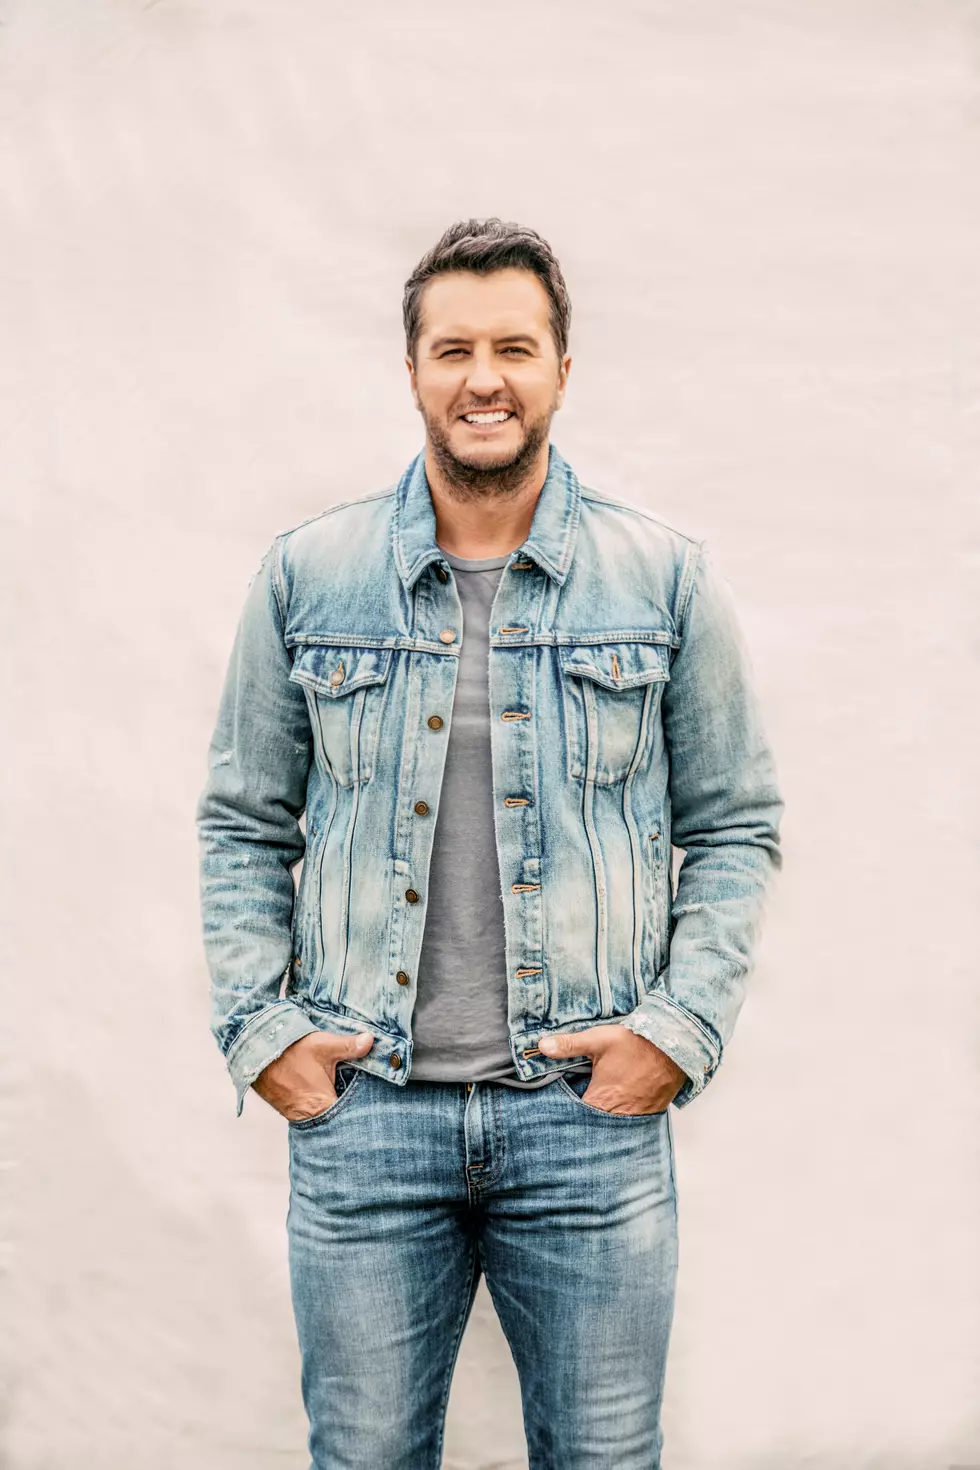 Luke Bryan Announces 2023 Tour With Plans To Stop In Minnesota This Fall